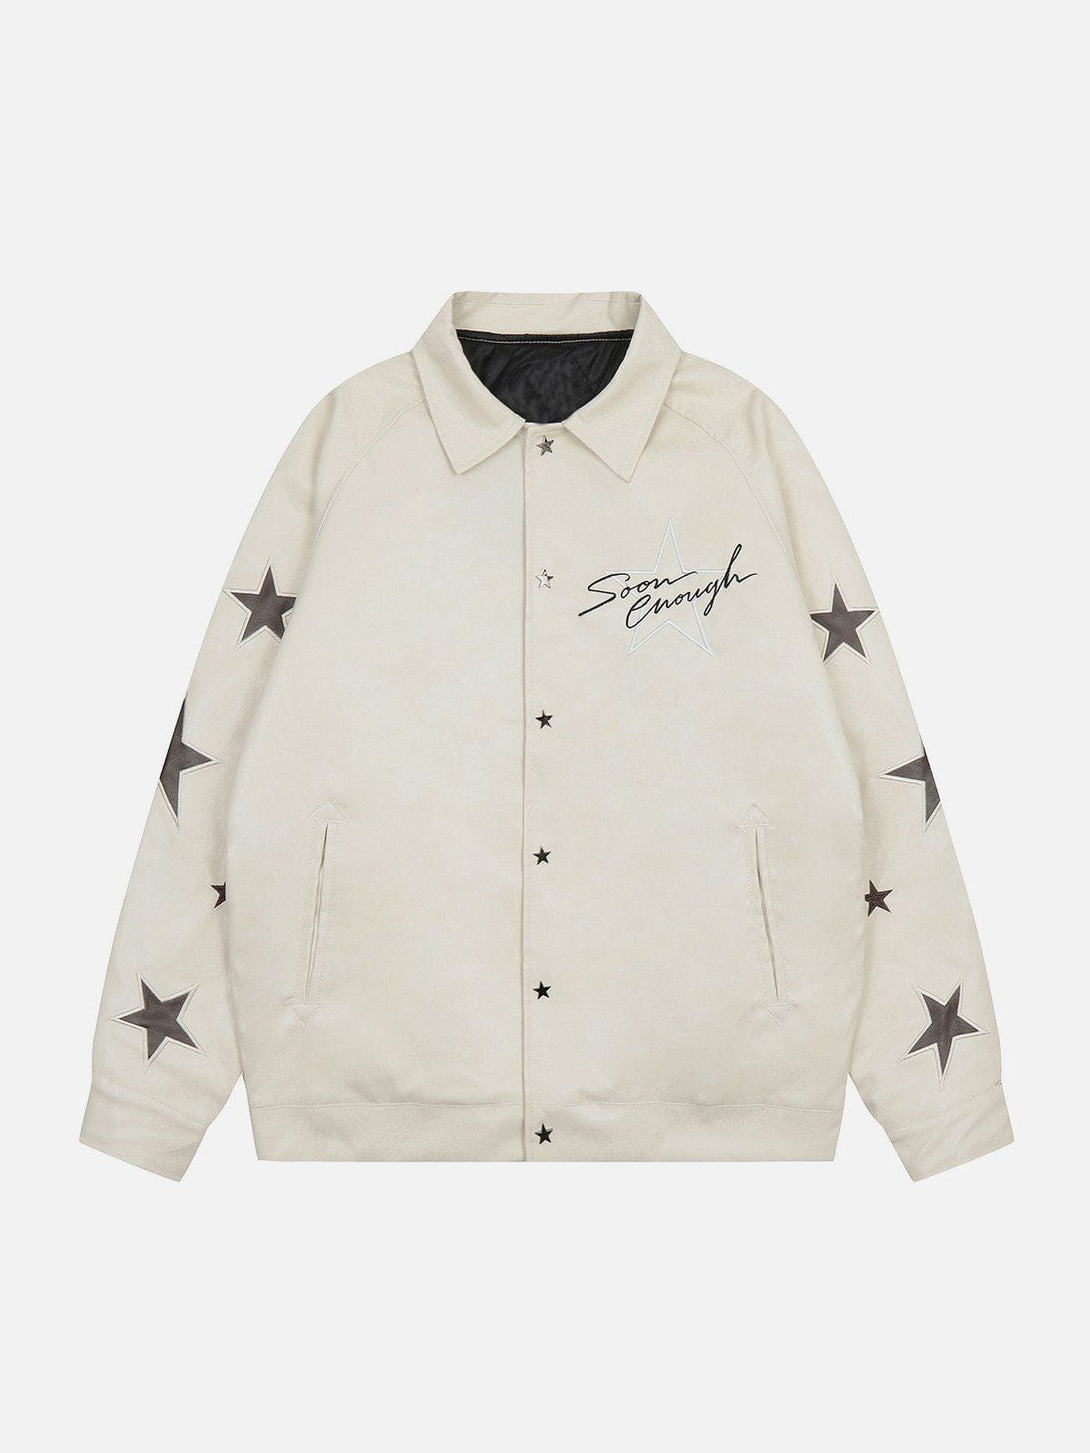 Levefly - Star Embroidery Leather Jacket - Streetwear Fashion - levefly.com